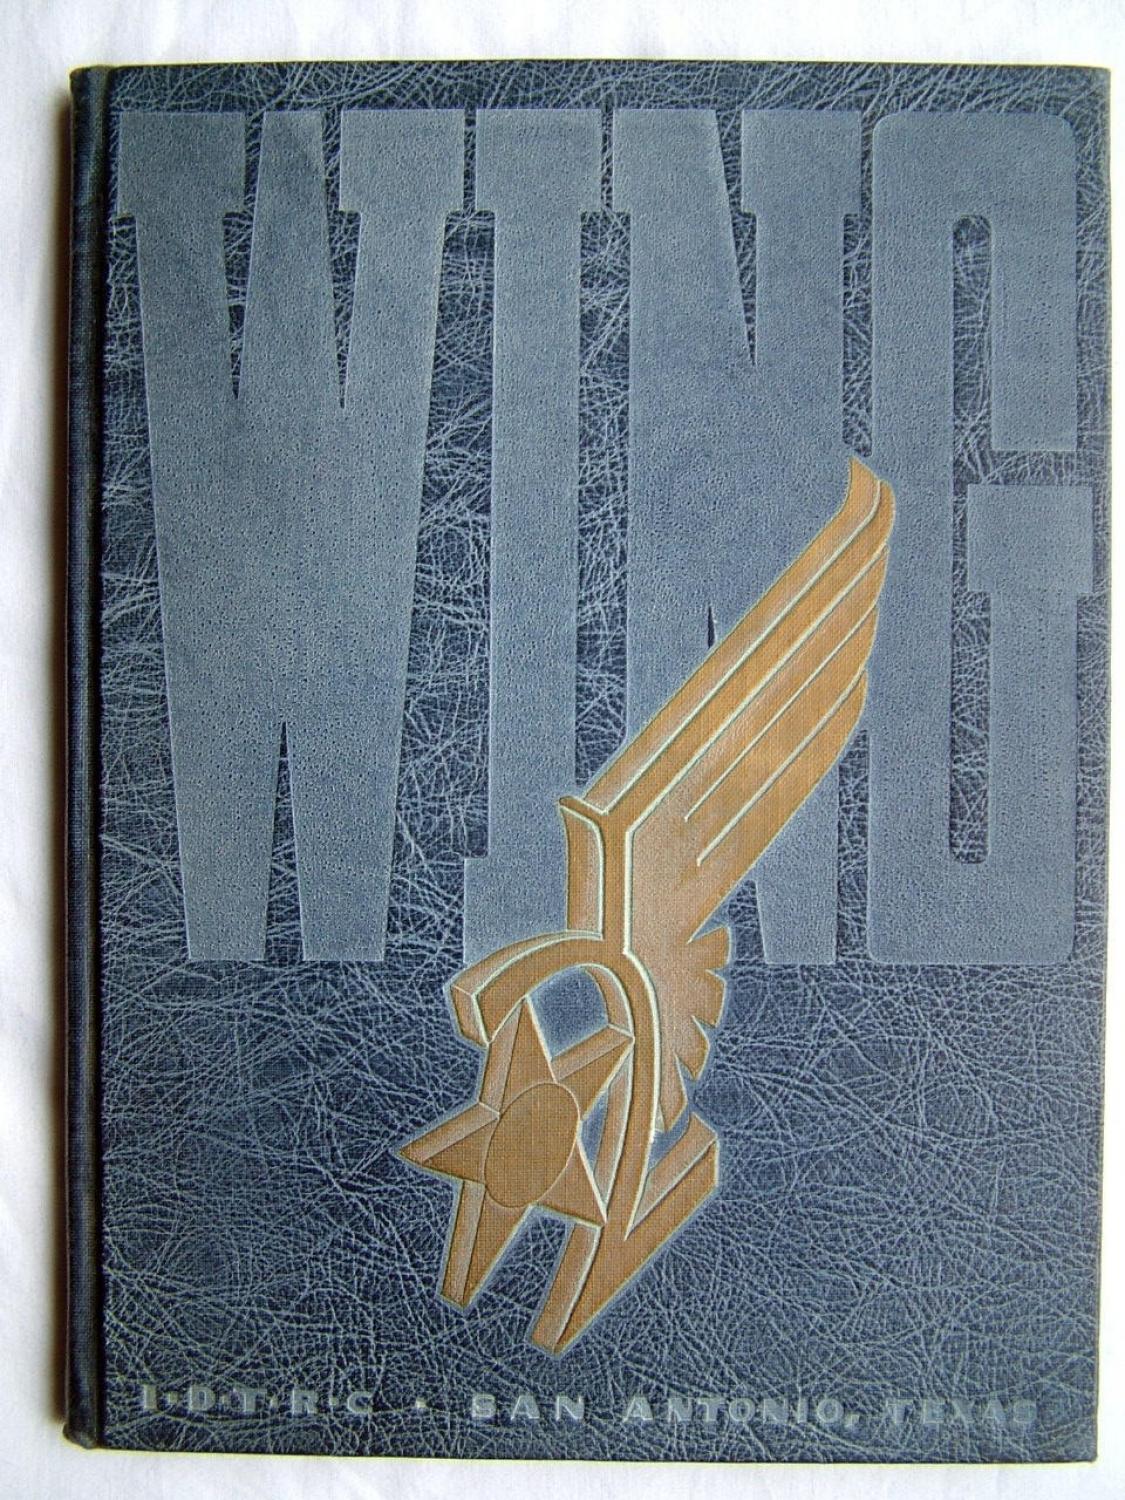 USAAF Training Command Yearbook